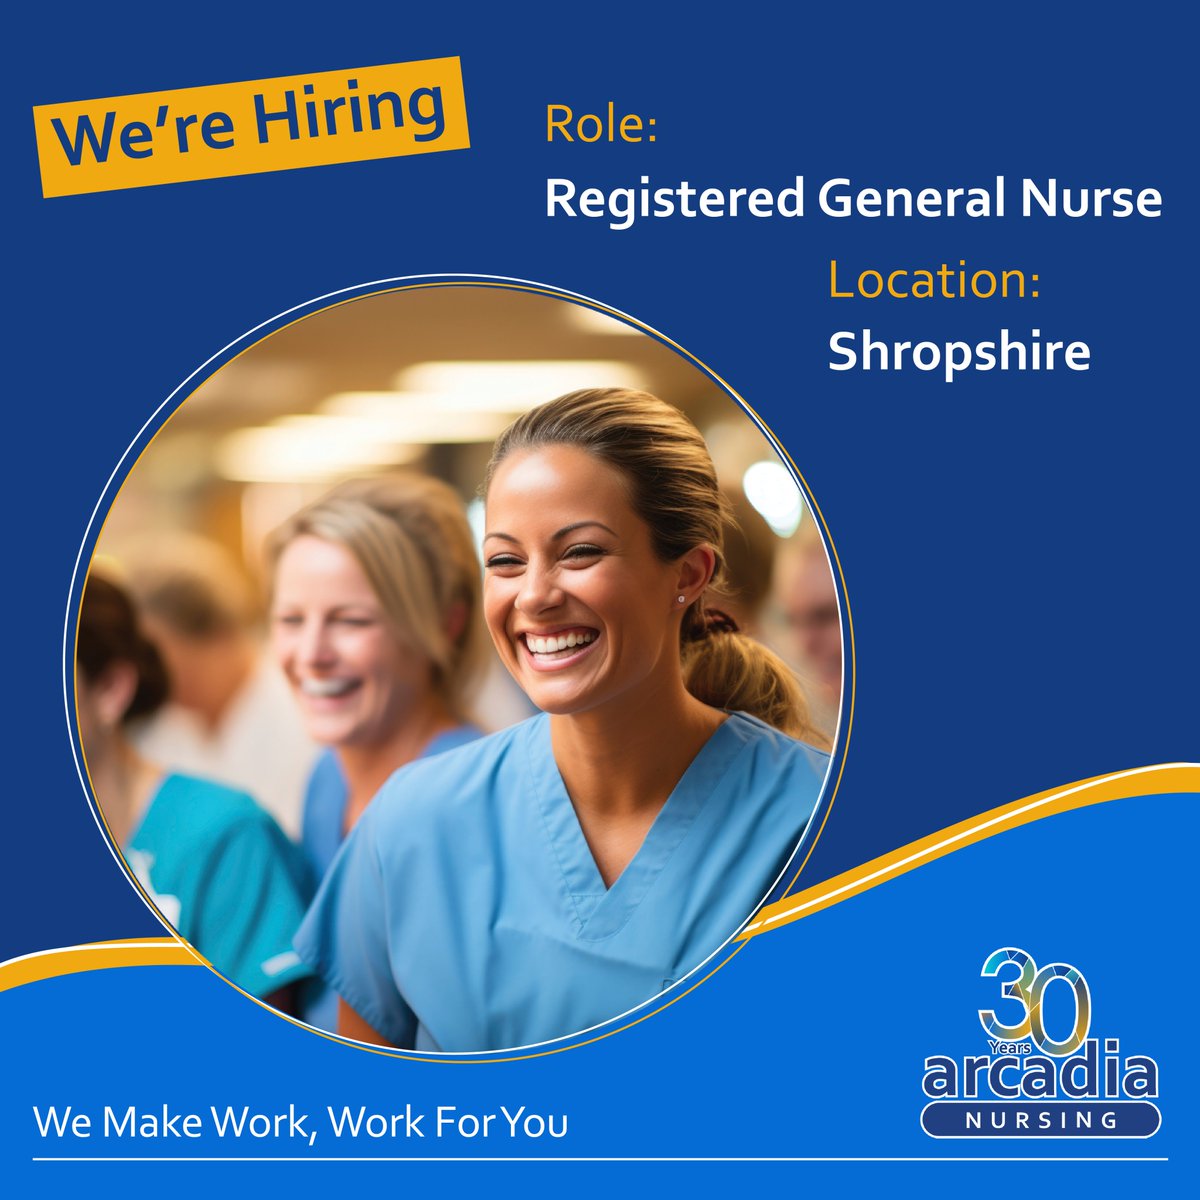 We are currently recruiting Registered General Nurses to work in Shropshire. If you are interested in joining Arcadia please contact the team on 01472 233 445 or apply online today: arcadianursing.co.uk/register-with-… 

#WeAreHiring #ApplyNow #nursingroles #nursingagency